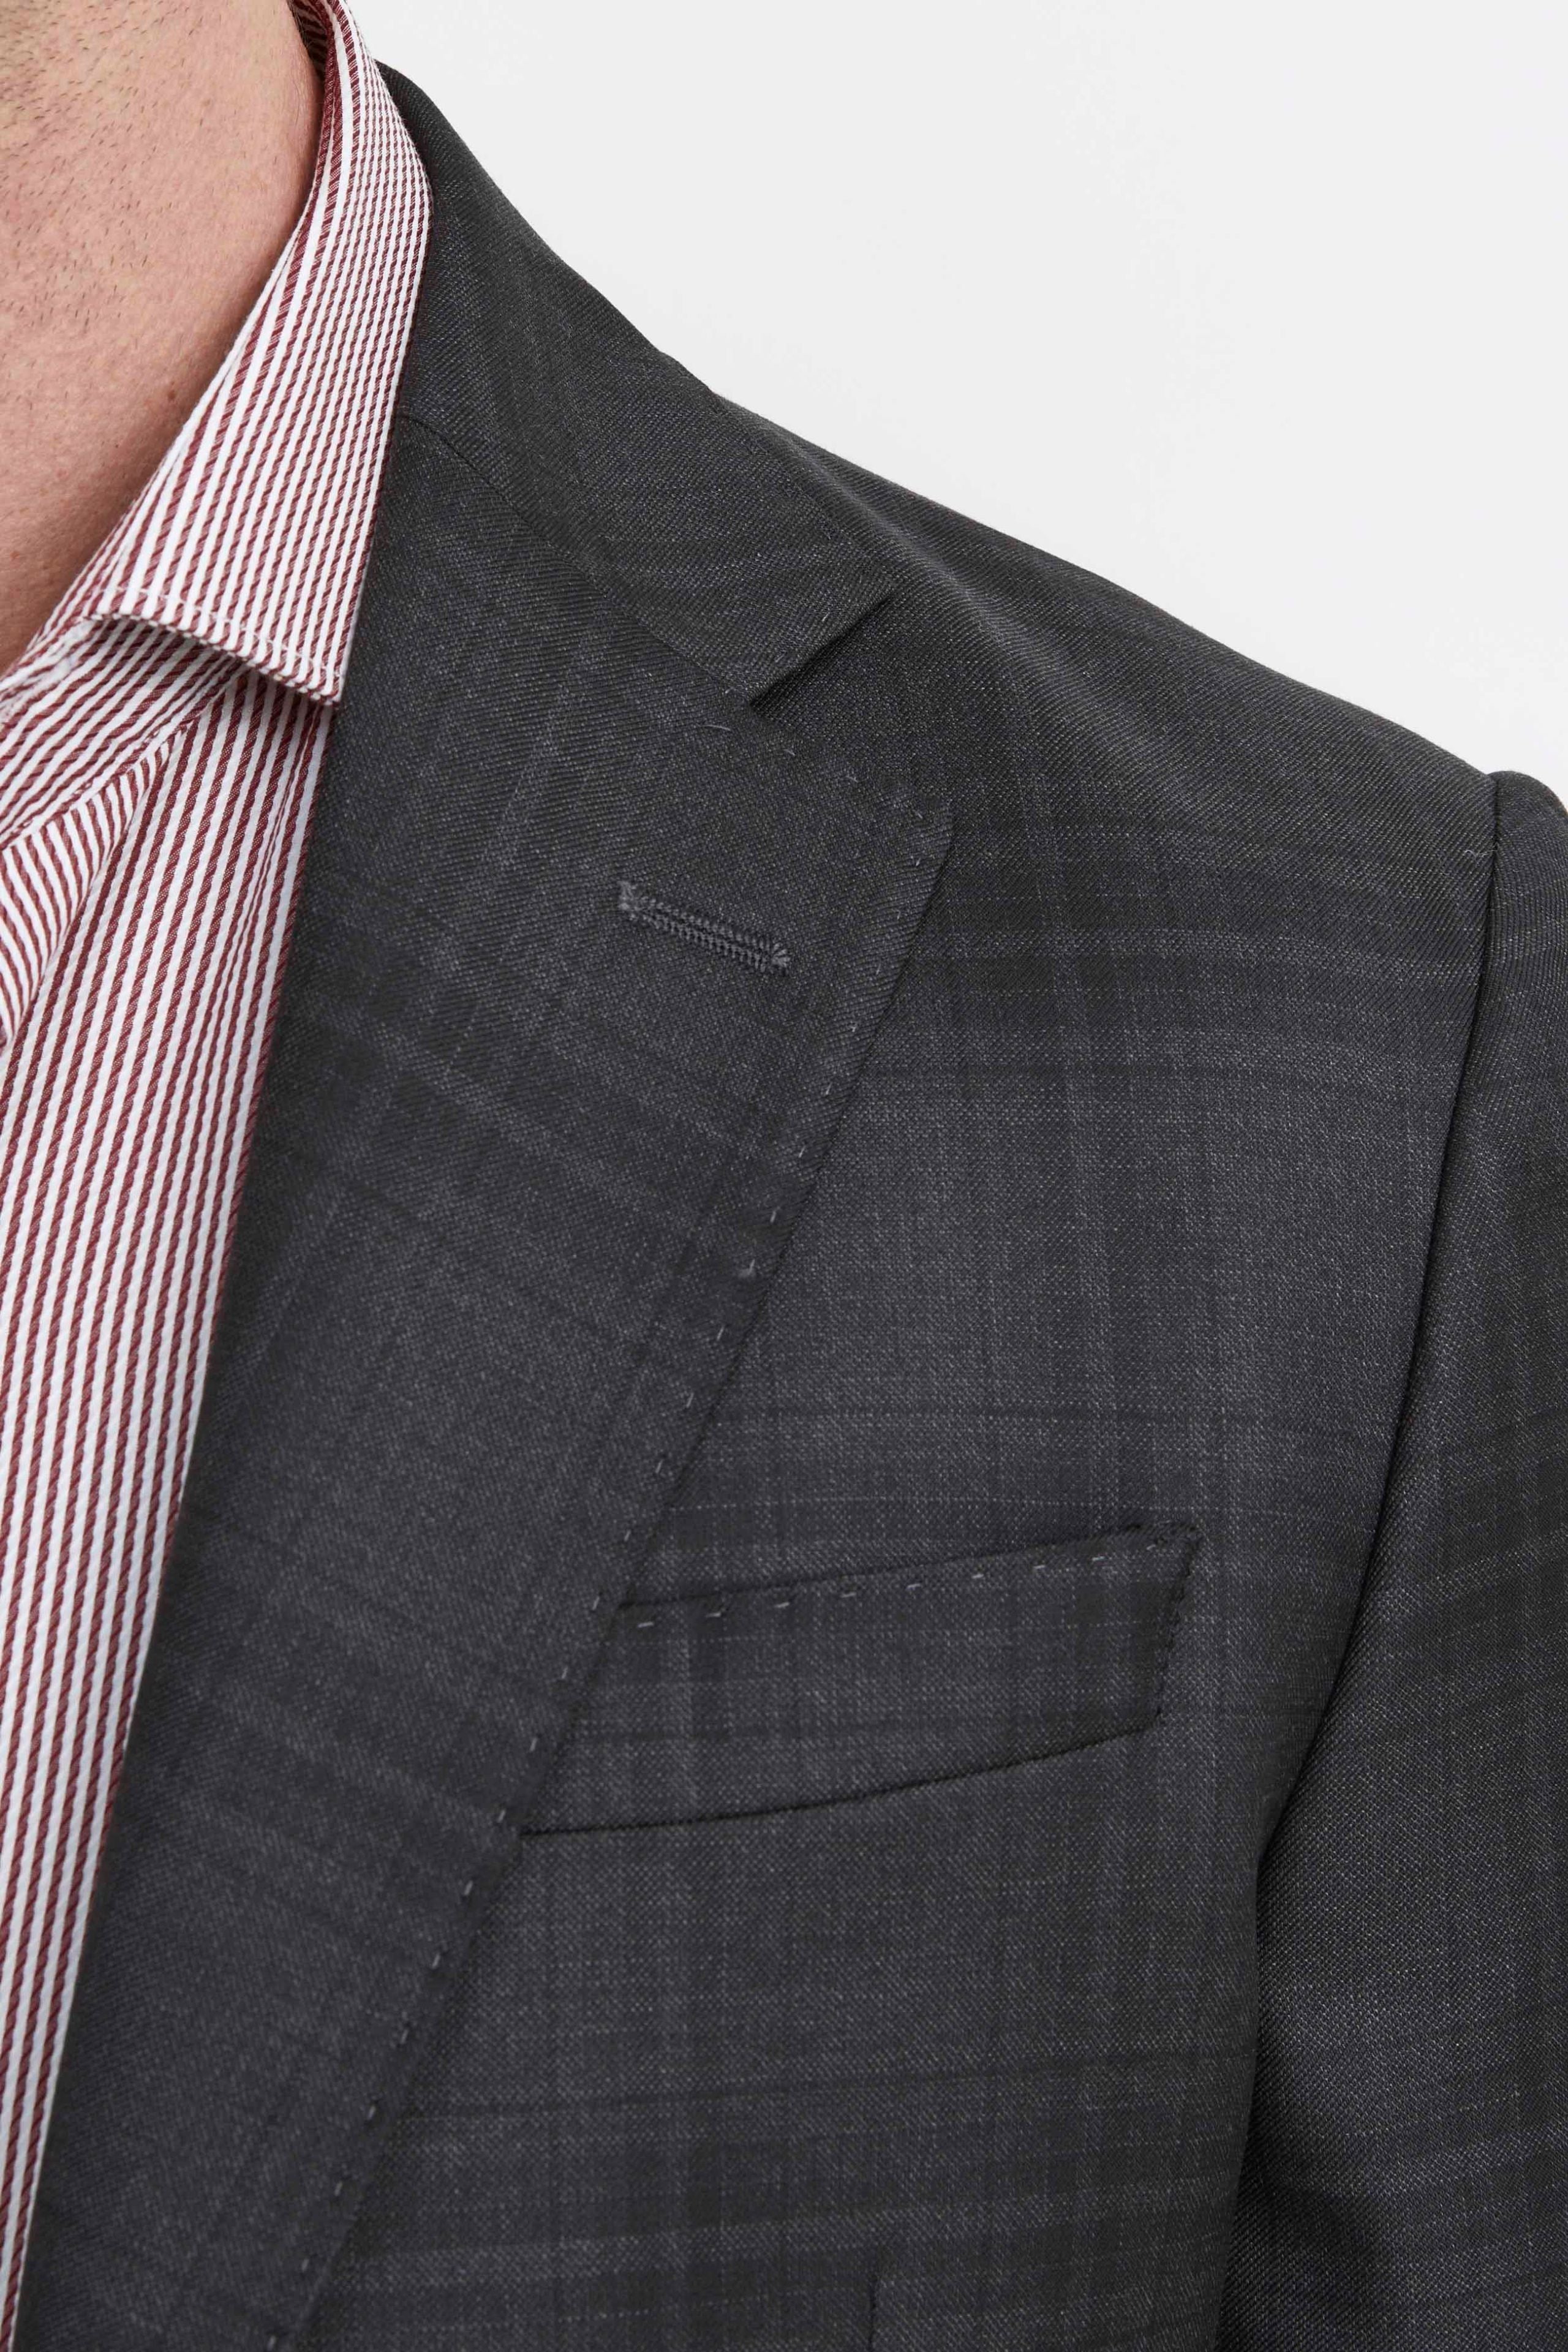 Check patterned grey slim suit - Grey check